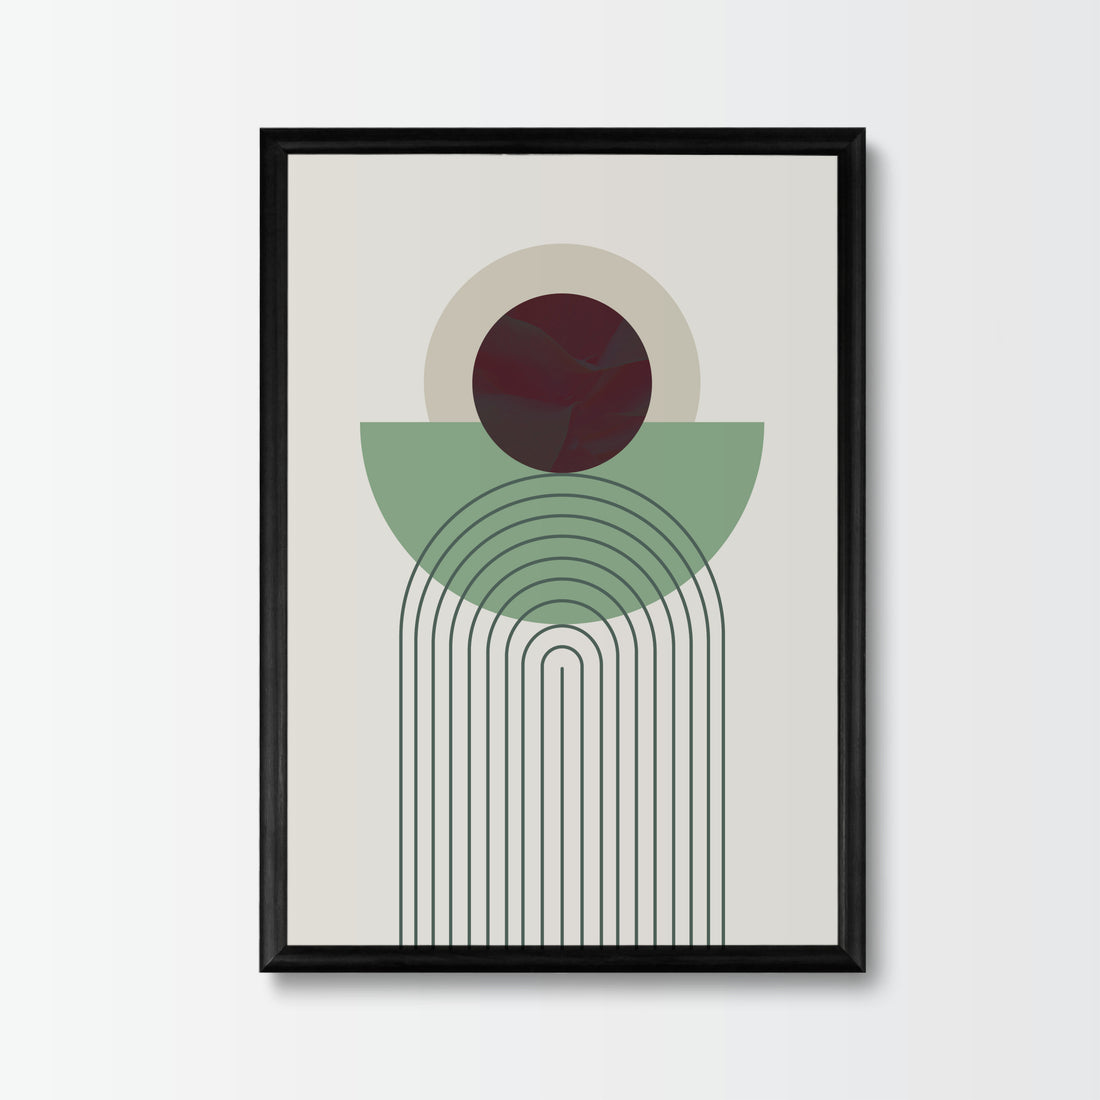 Poster New Beginnings - Add sophistication to your home